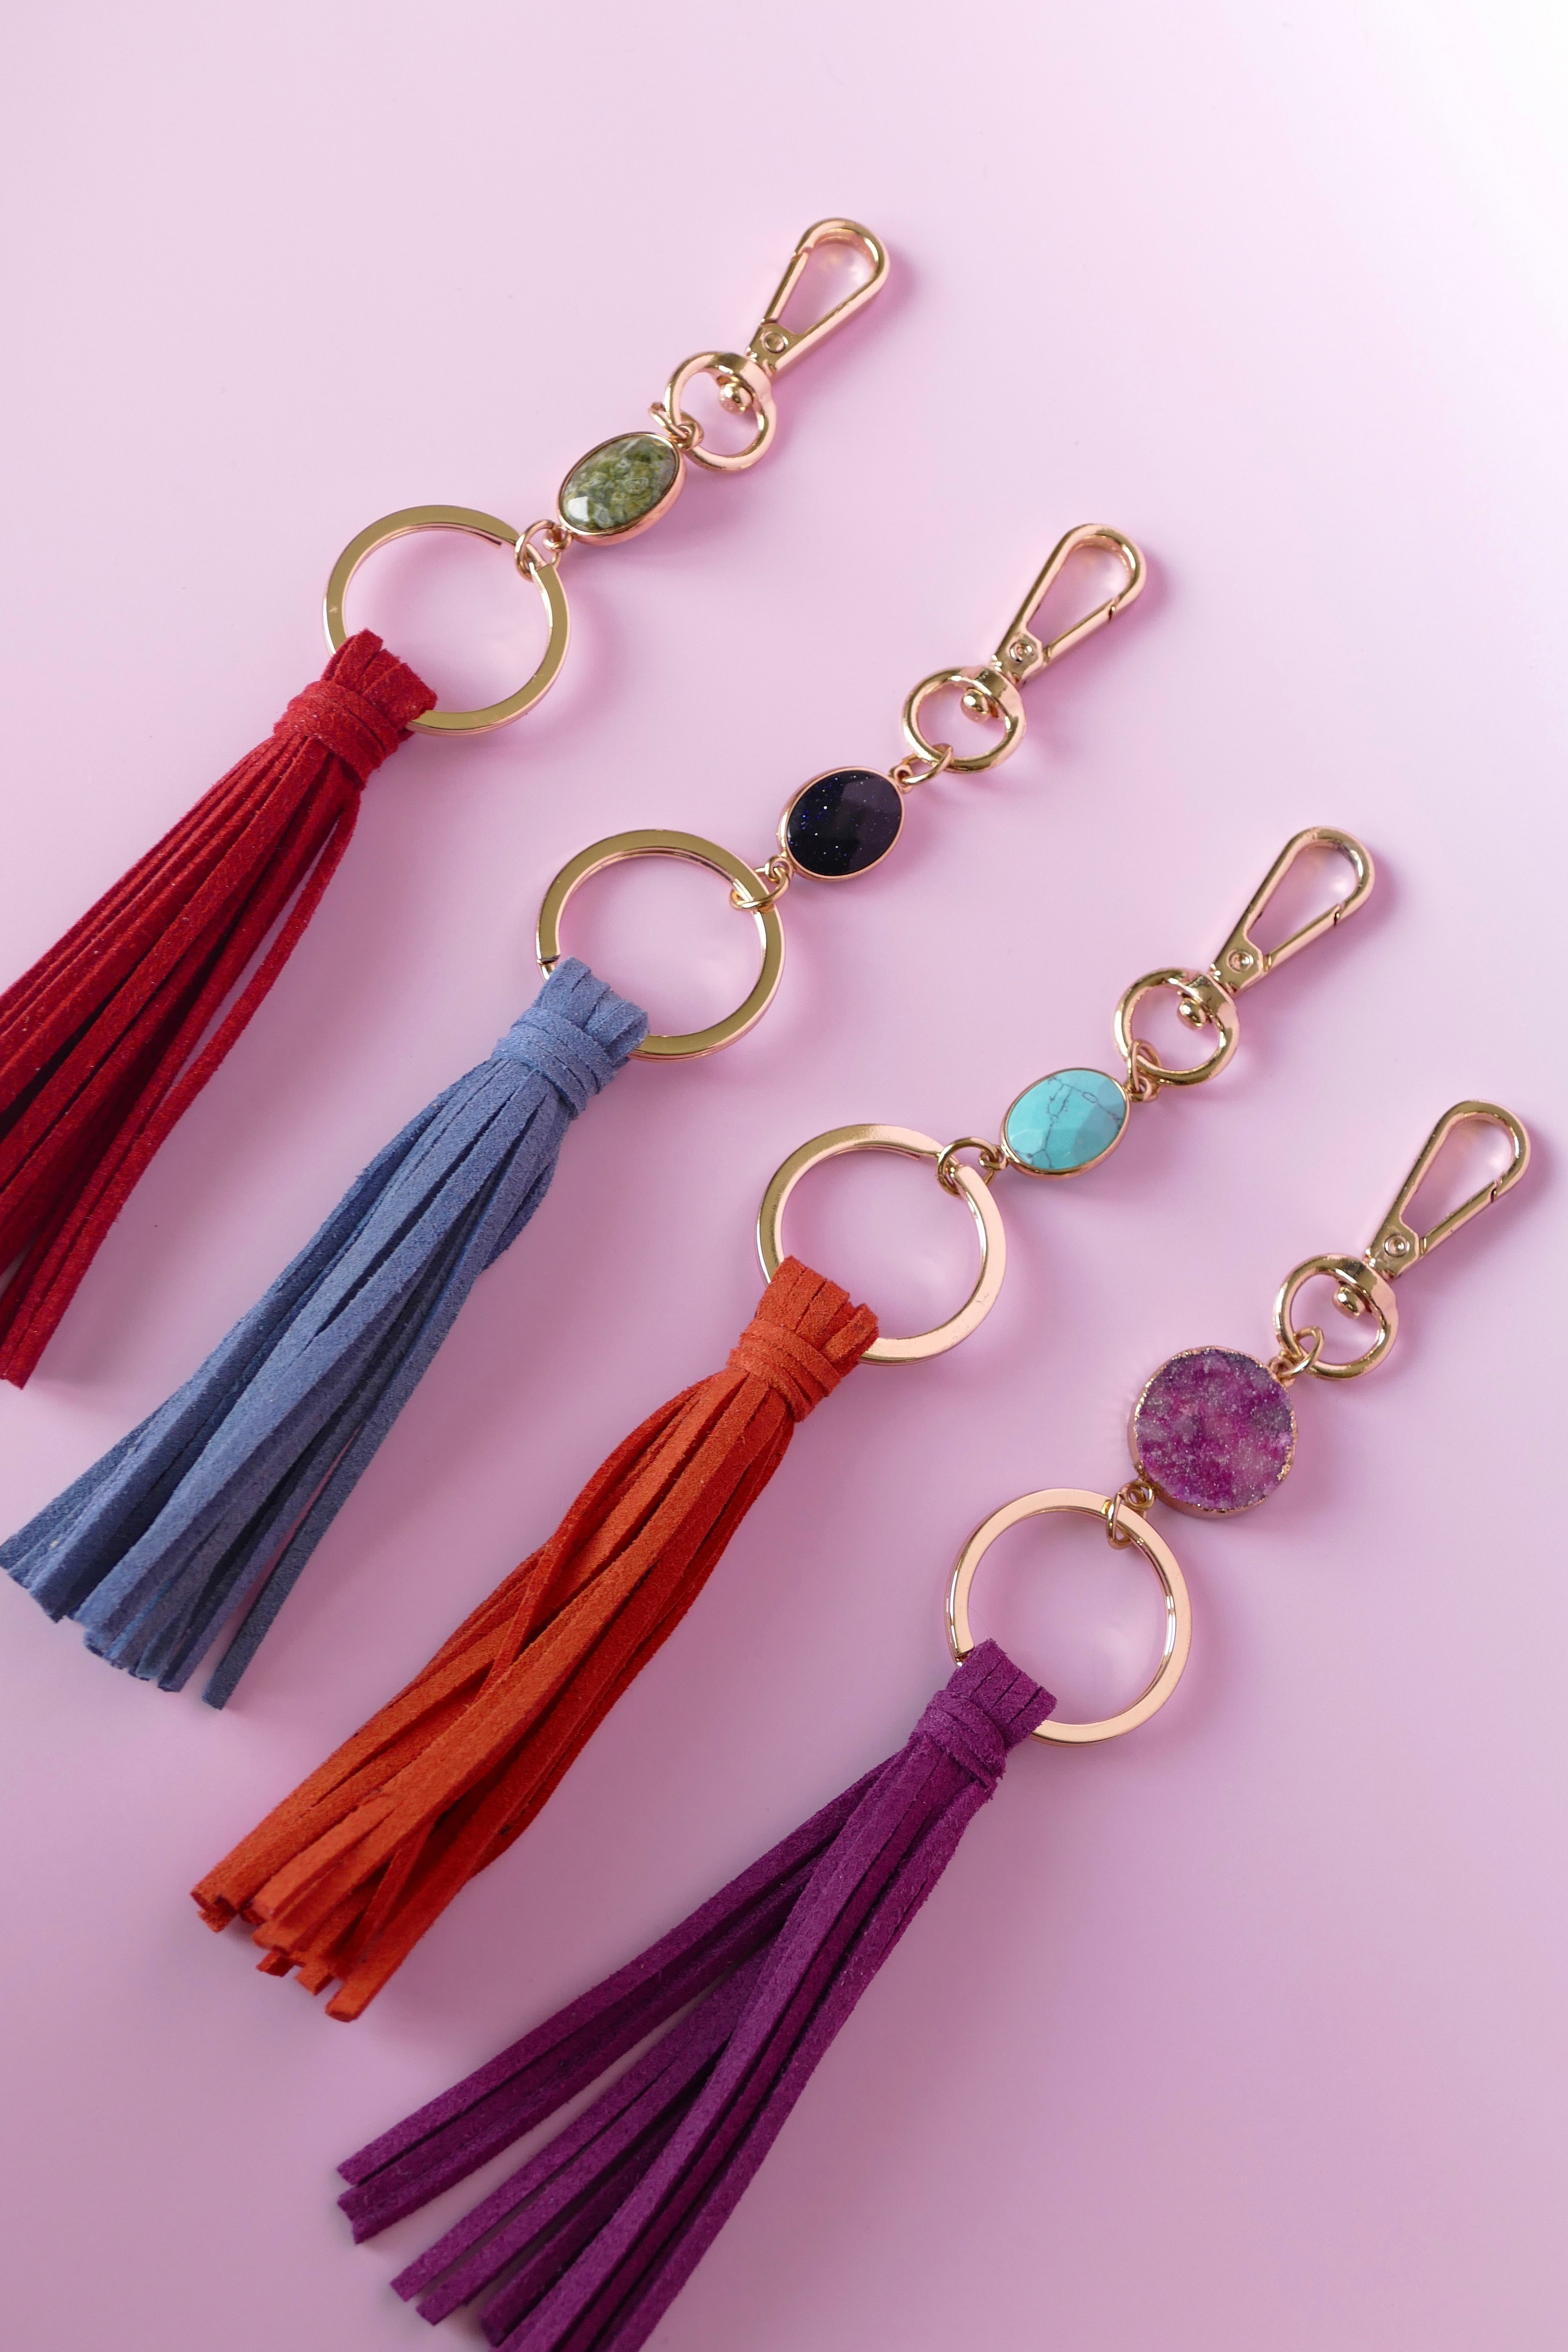 Colorful keychains